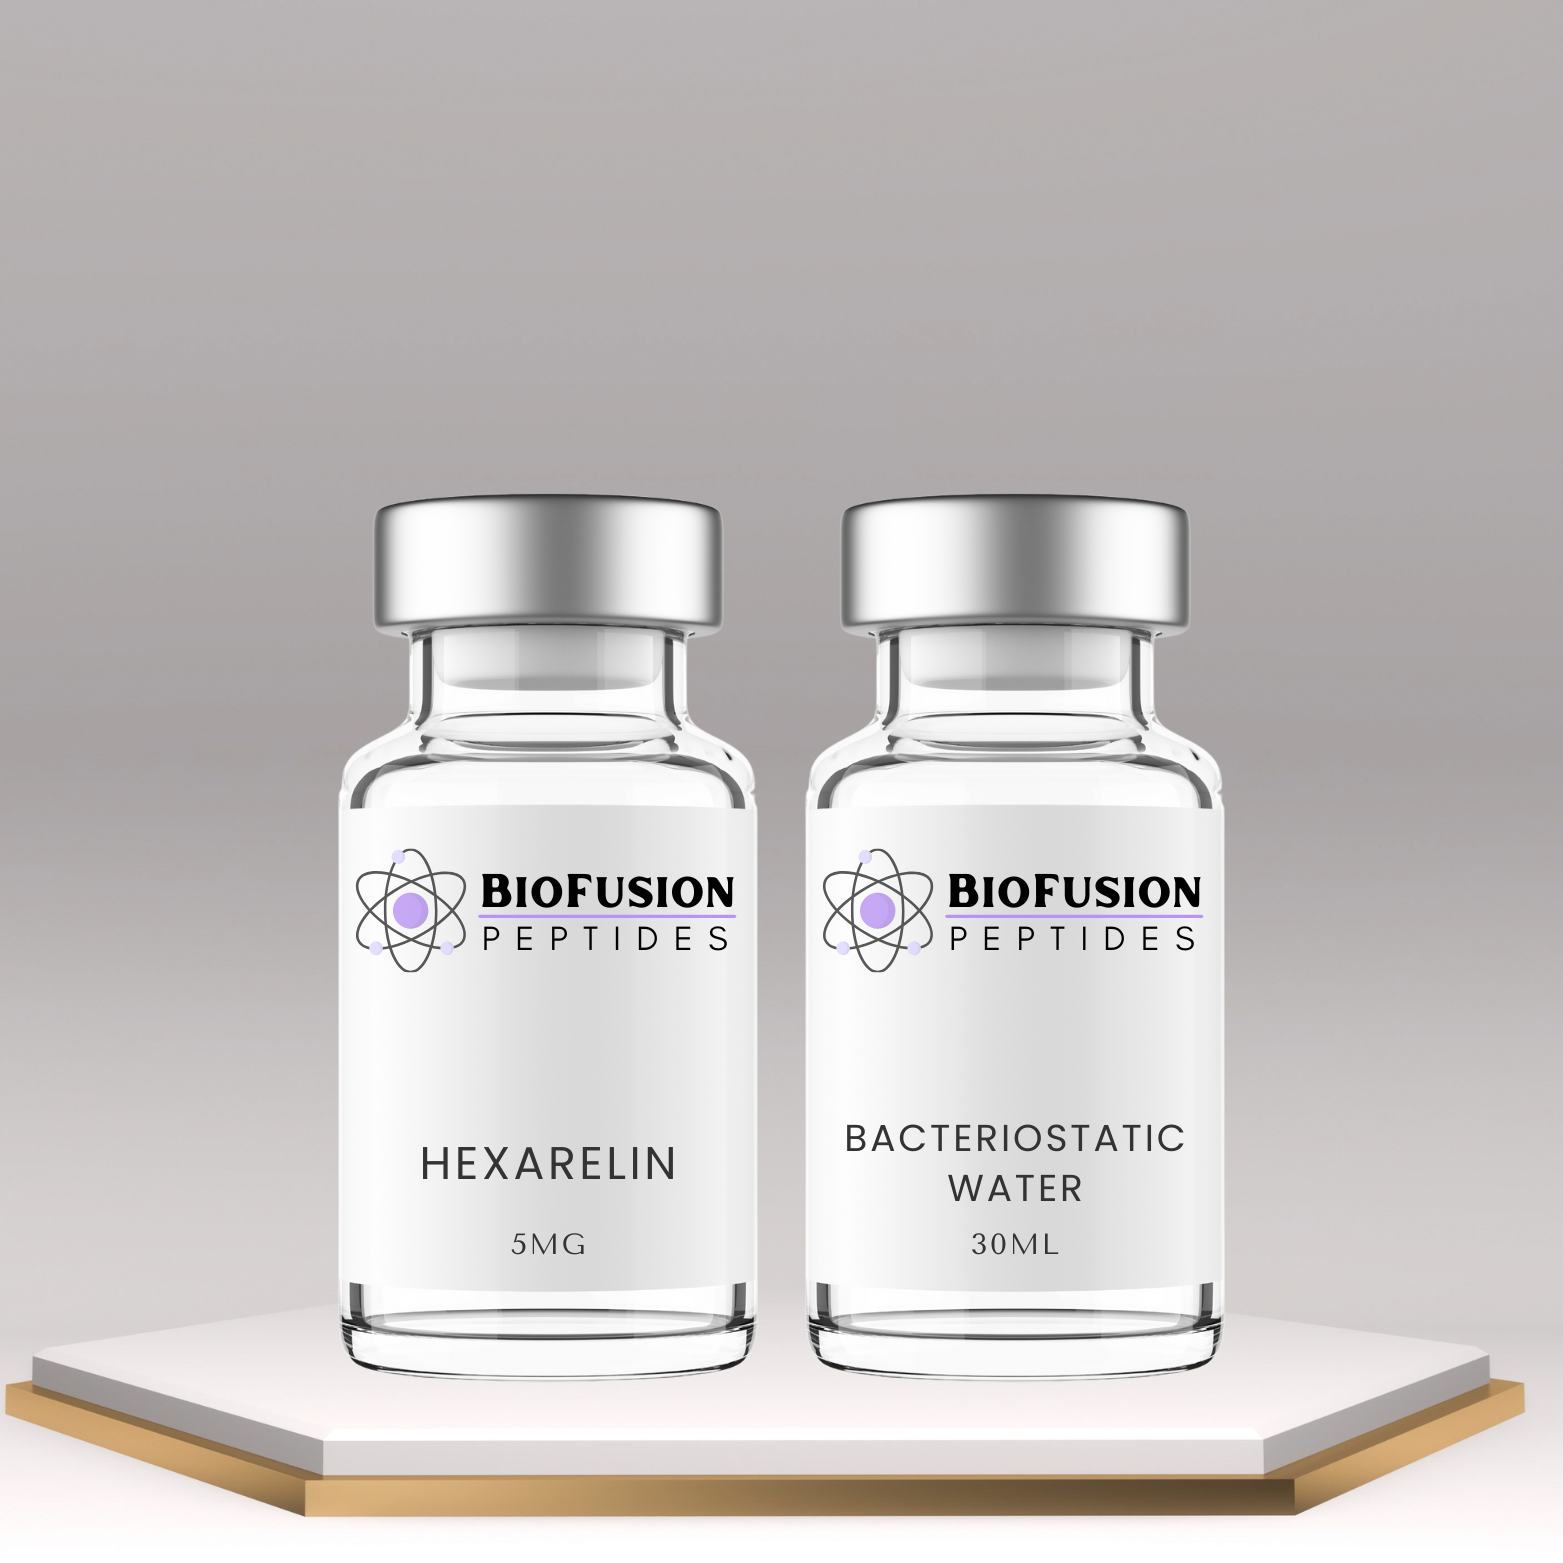 BioFusion Peptides Hexarelin kit with bacteriostatic water